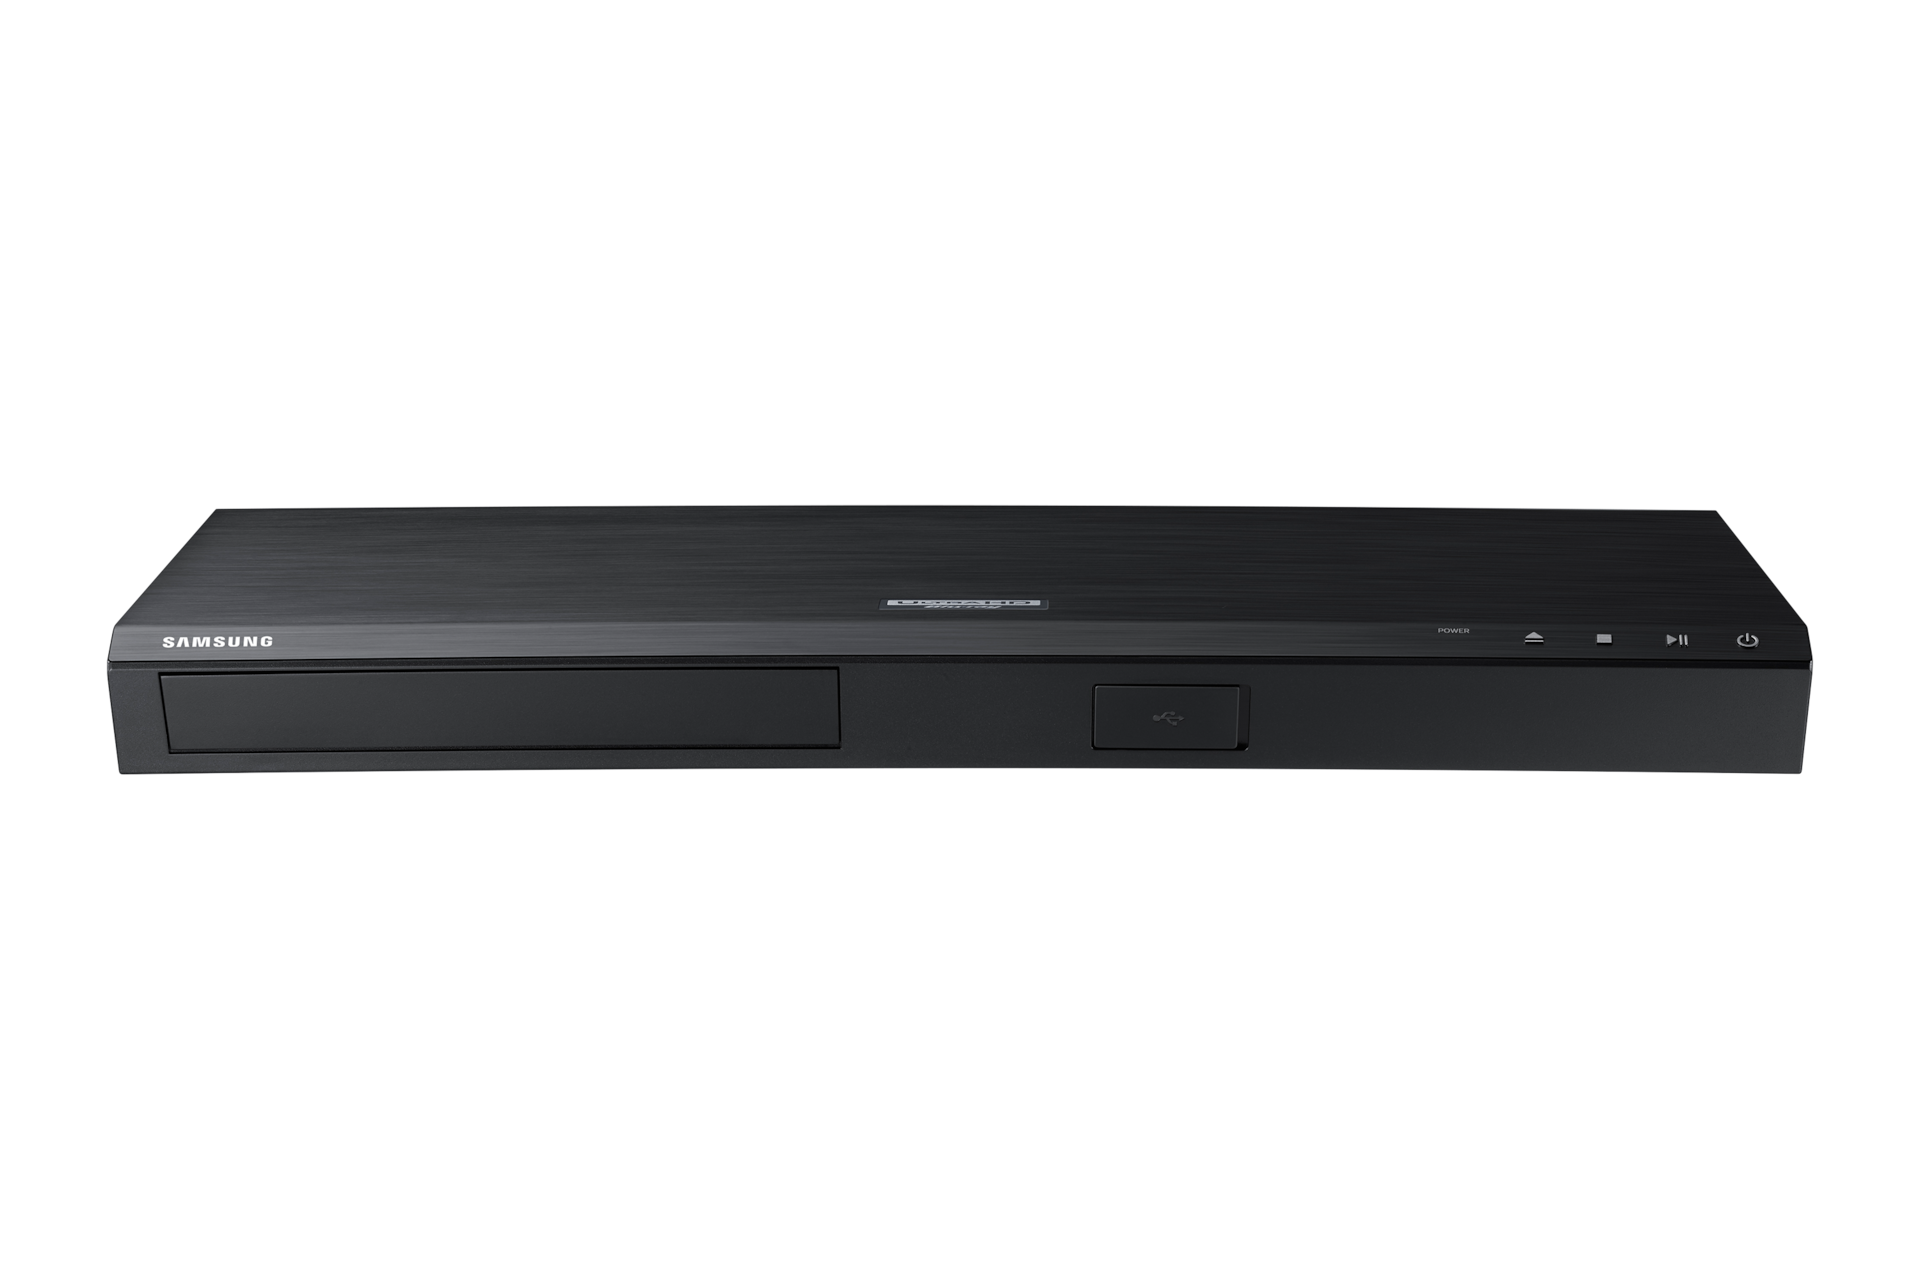 Ultra Hd Blu Ray Player Ubd M9000 With True To Life 4k Resolution Samsung Uk